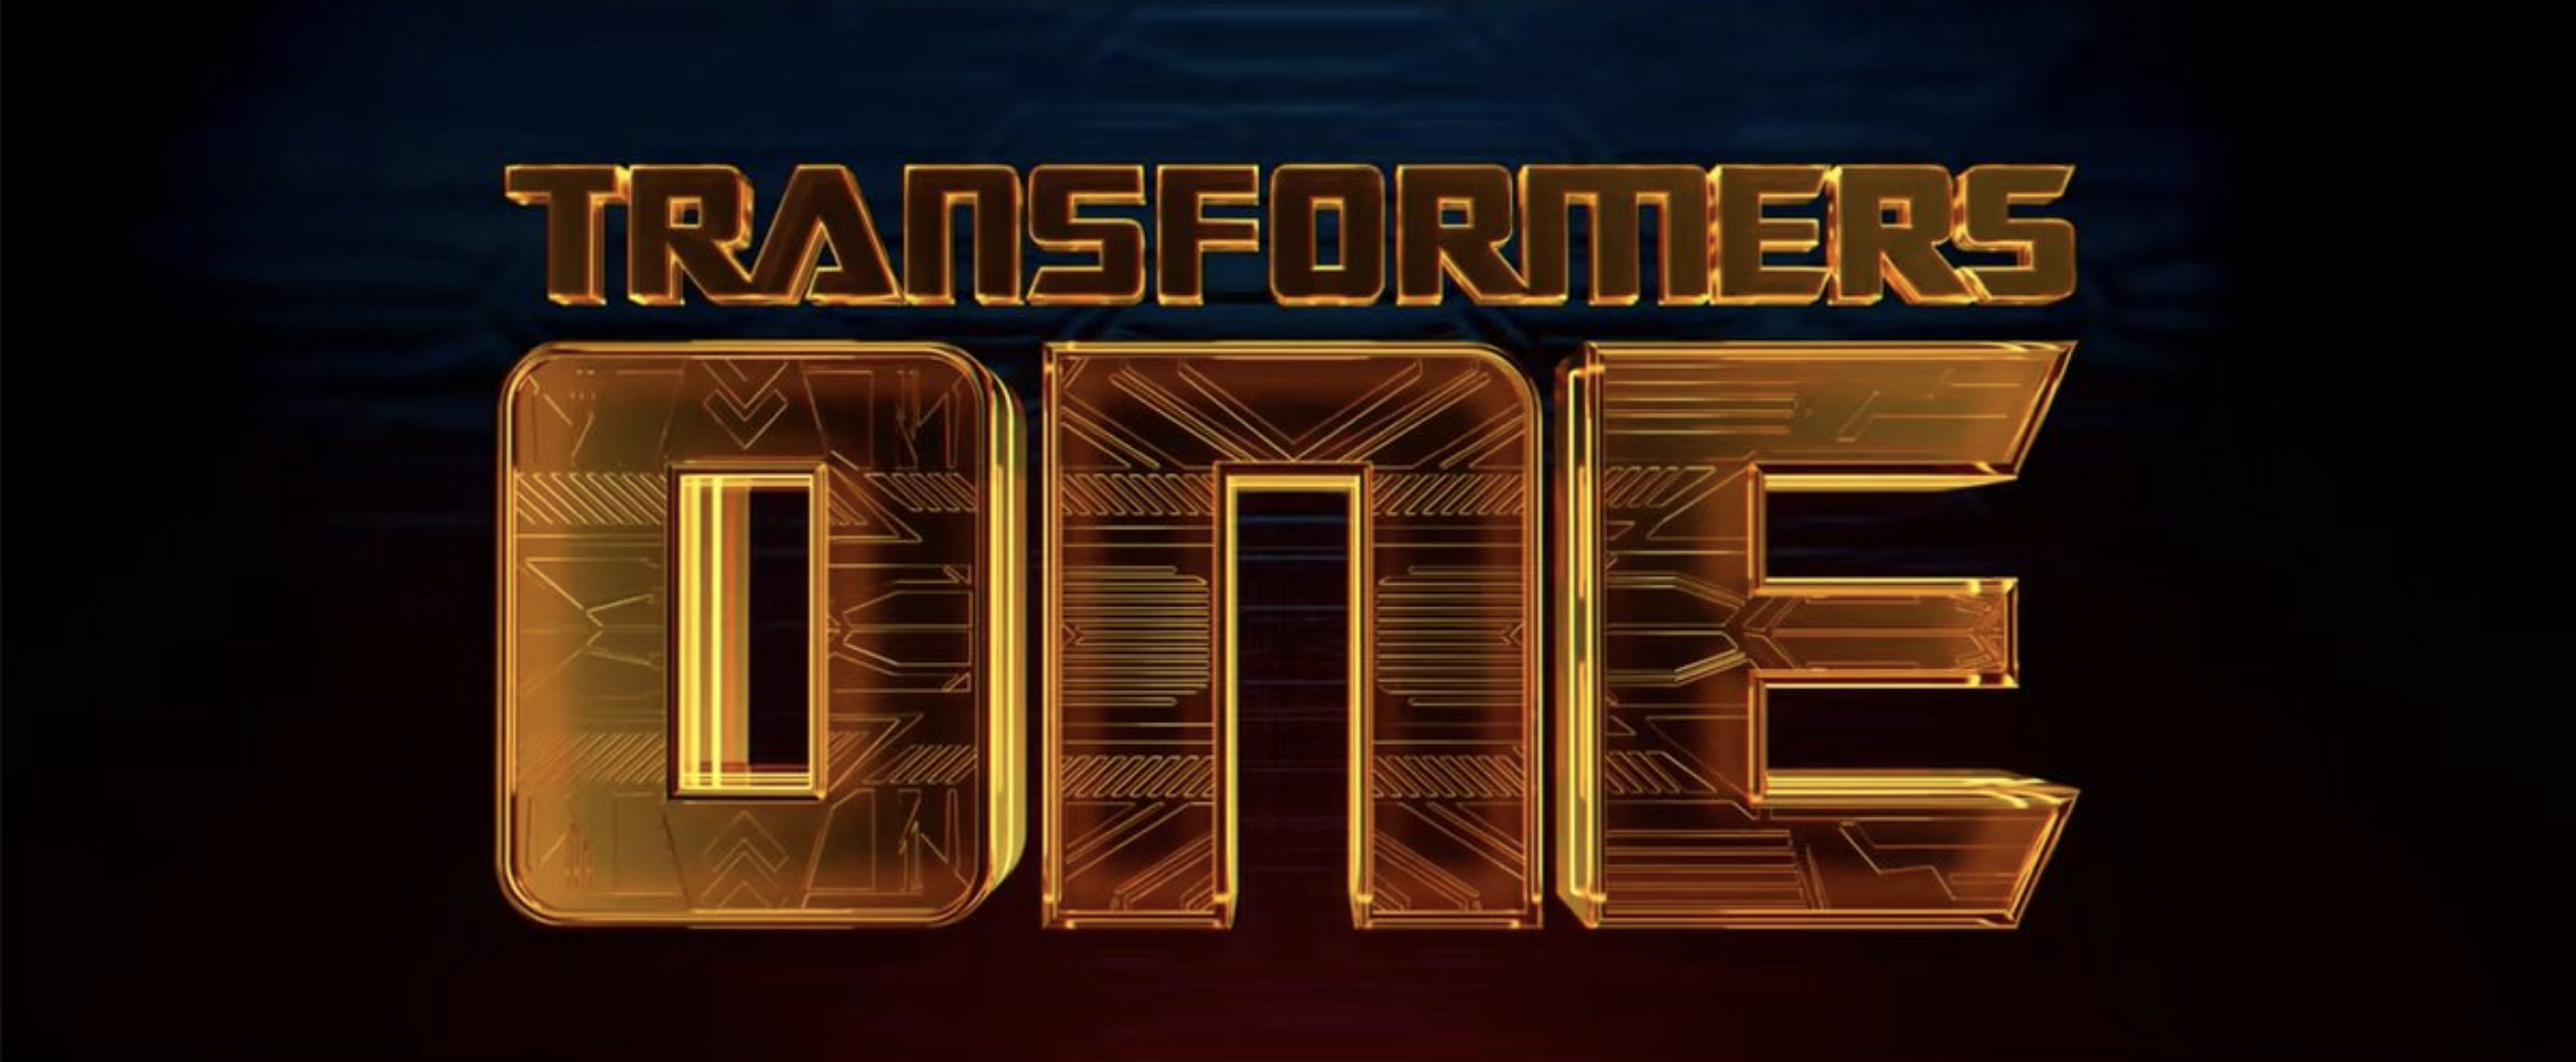 The ‘Transformers One’ Trailer Gives a Glimpse at Optimus Prime & Megatron’s Origin Story